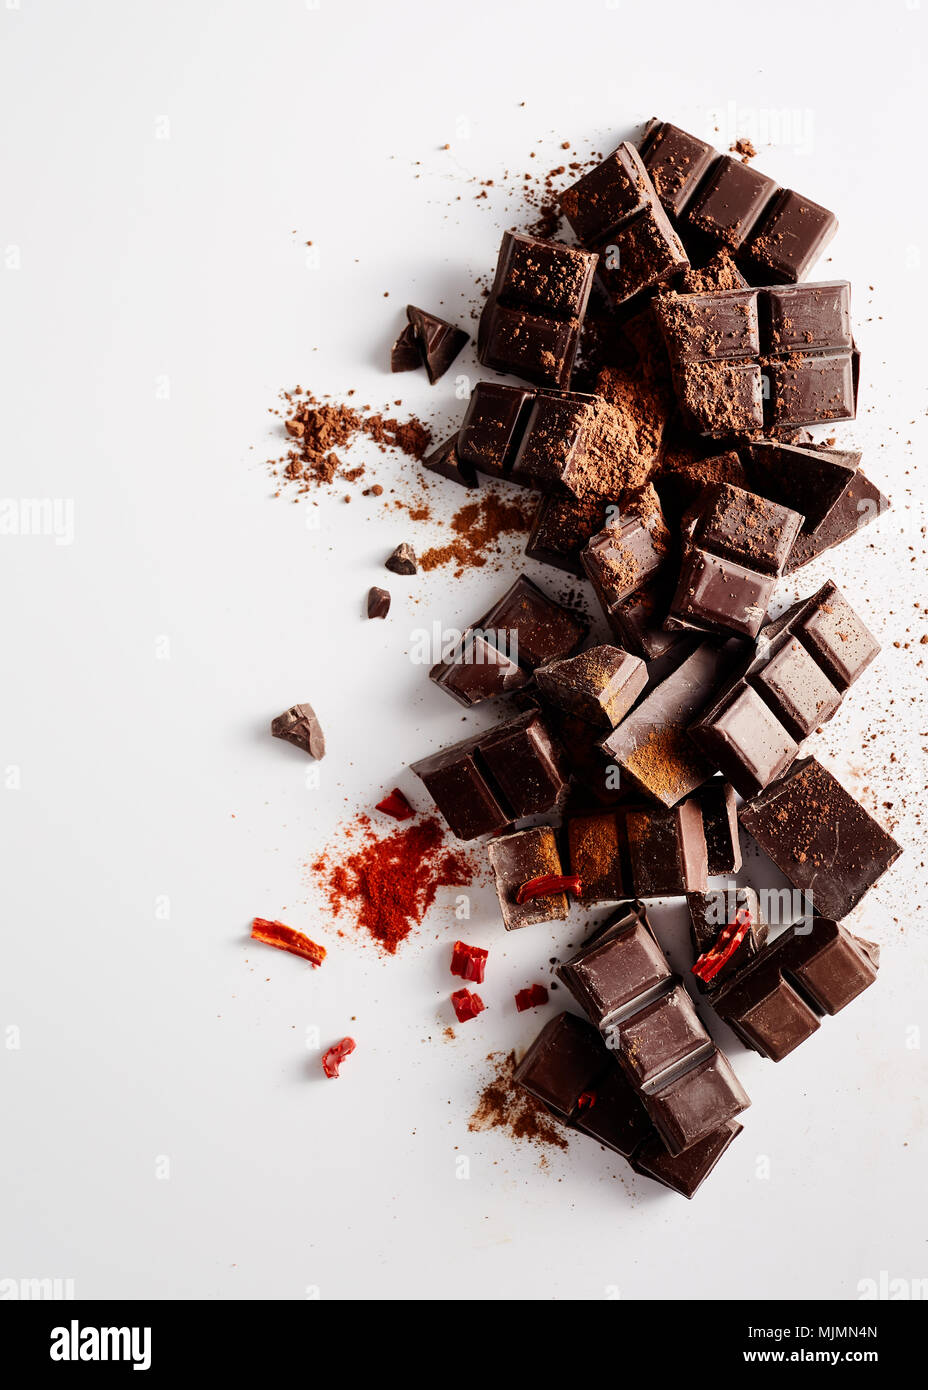 Chunks of dark chocolate with spices on white background. Stock Photo